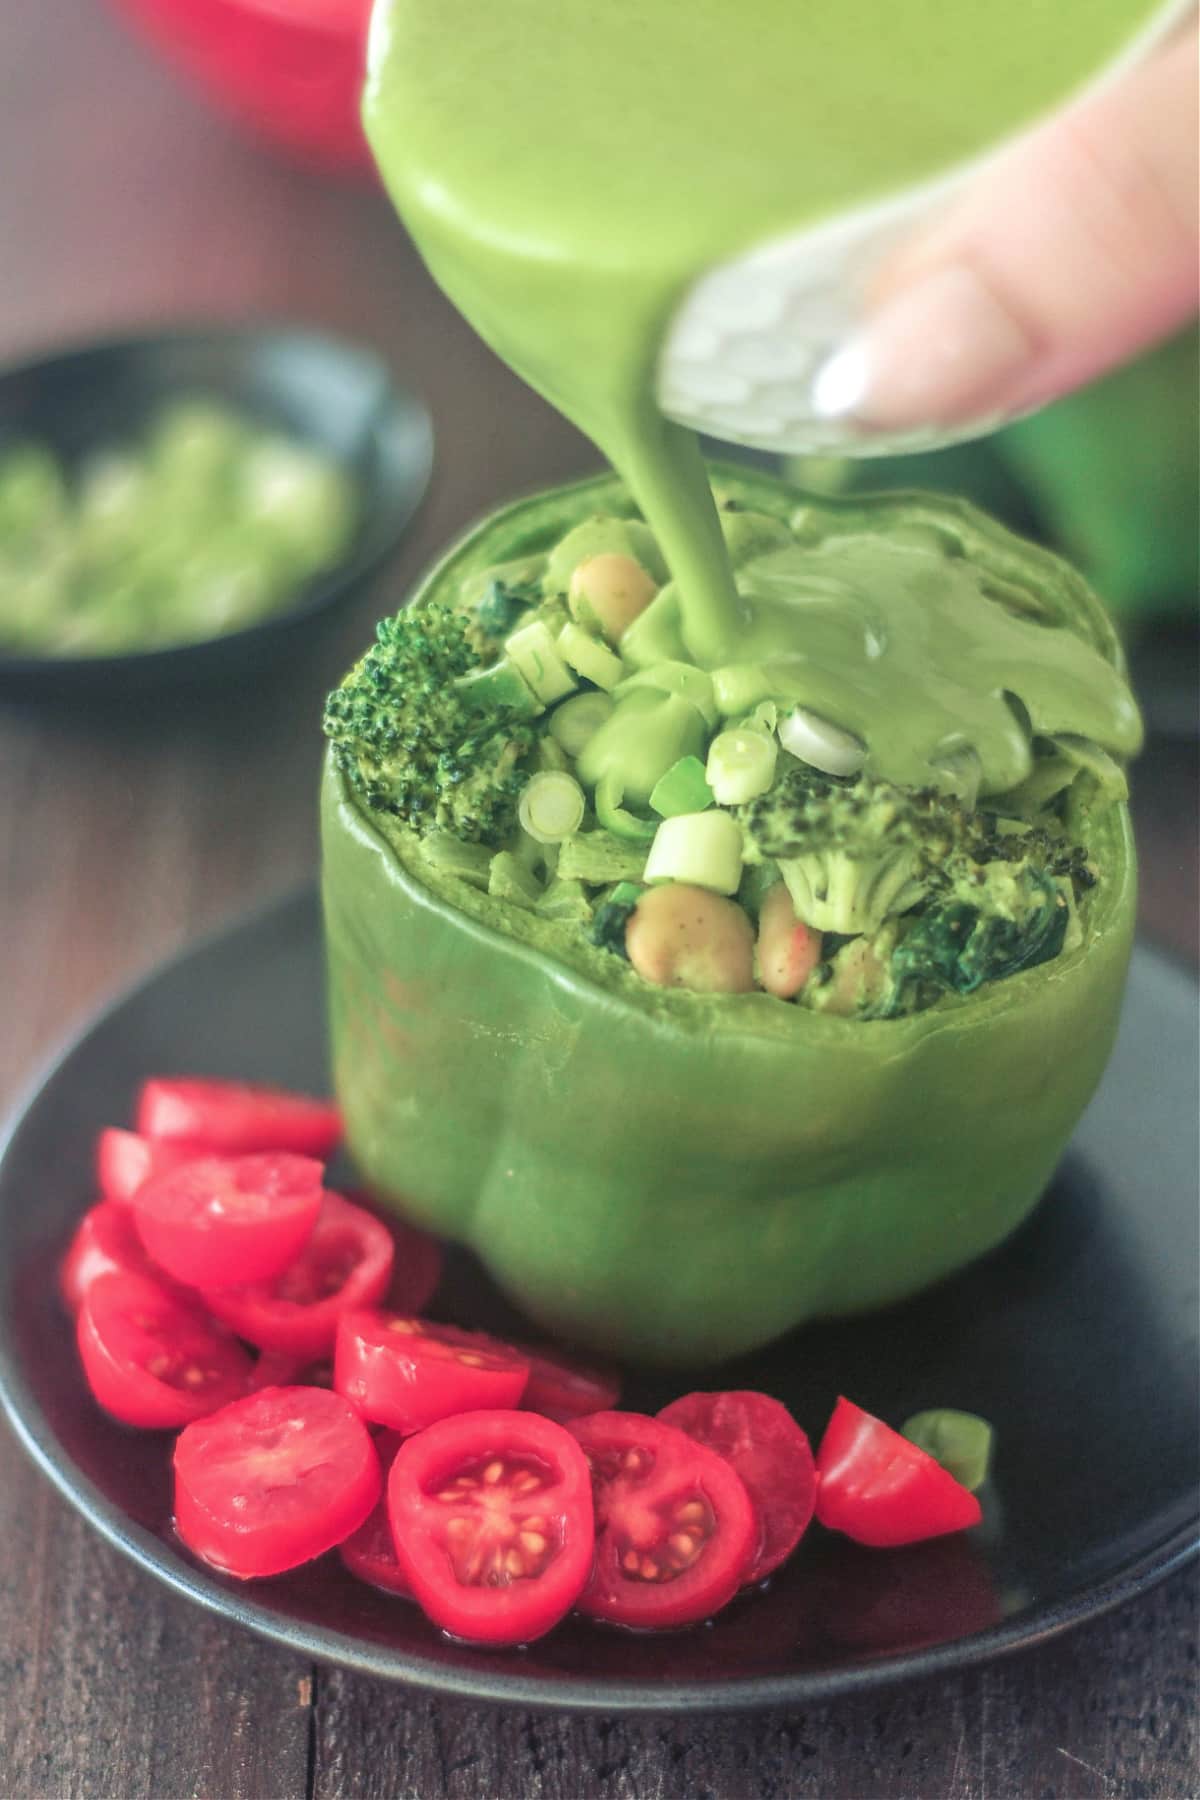 A hand pouring green sauce over a green bell pepper standing on a matte black plate. The pepper is stuffed with a green goddess mixture of beans, broccoli, onion, riced palm hearts. Sliced red cherry tomatoes sit on side of pepper as a salad / garnish.